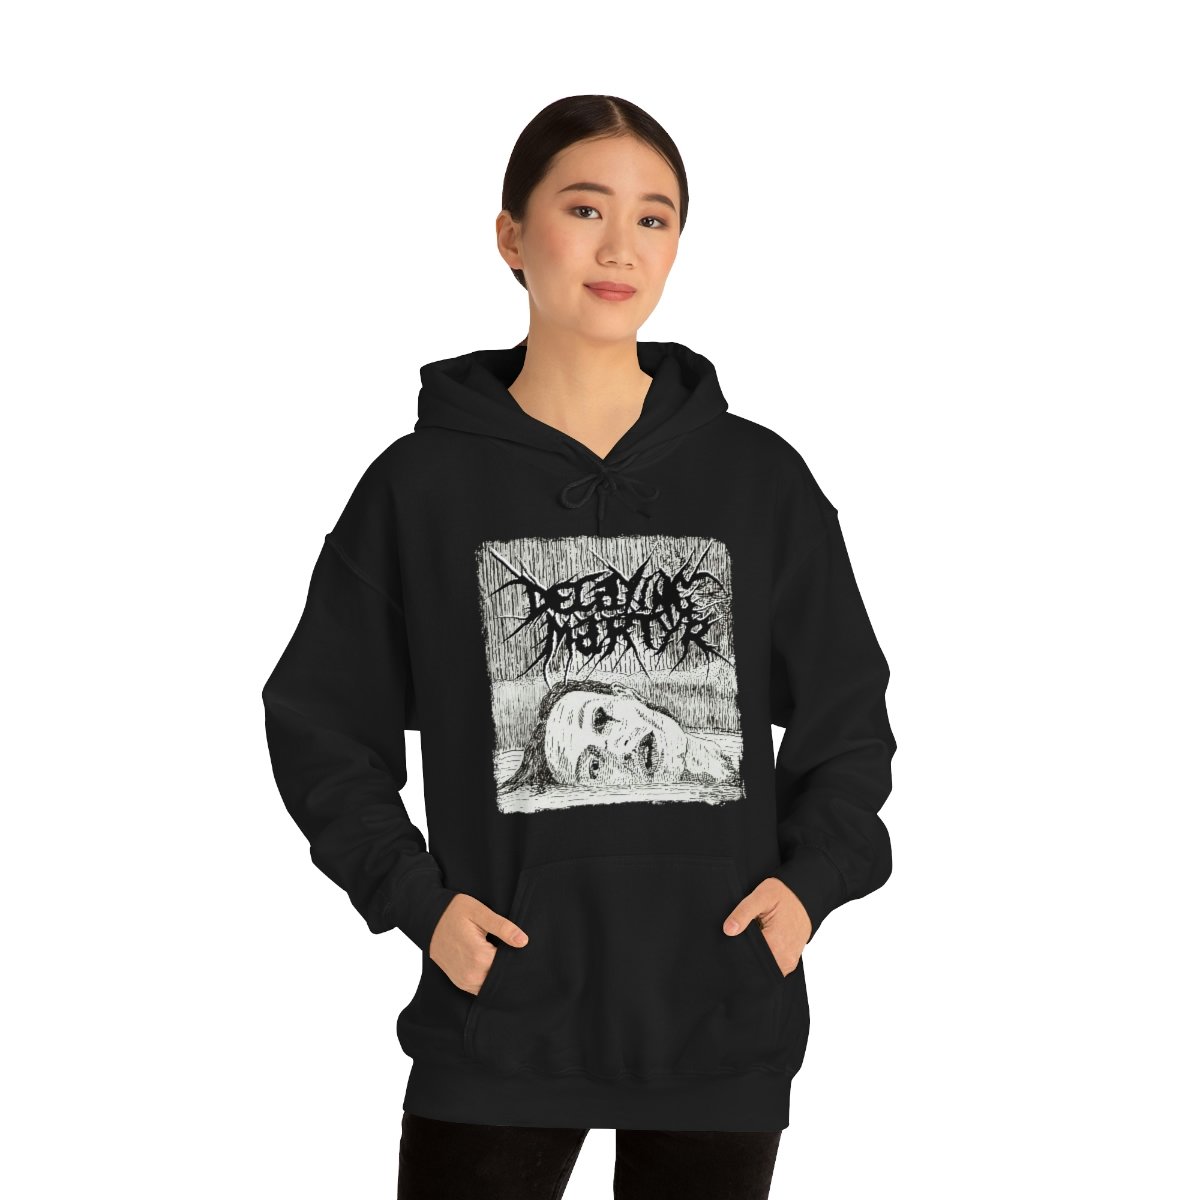 Decaying Martyr Pullover Hooded Sweatshirt